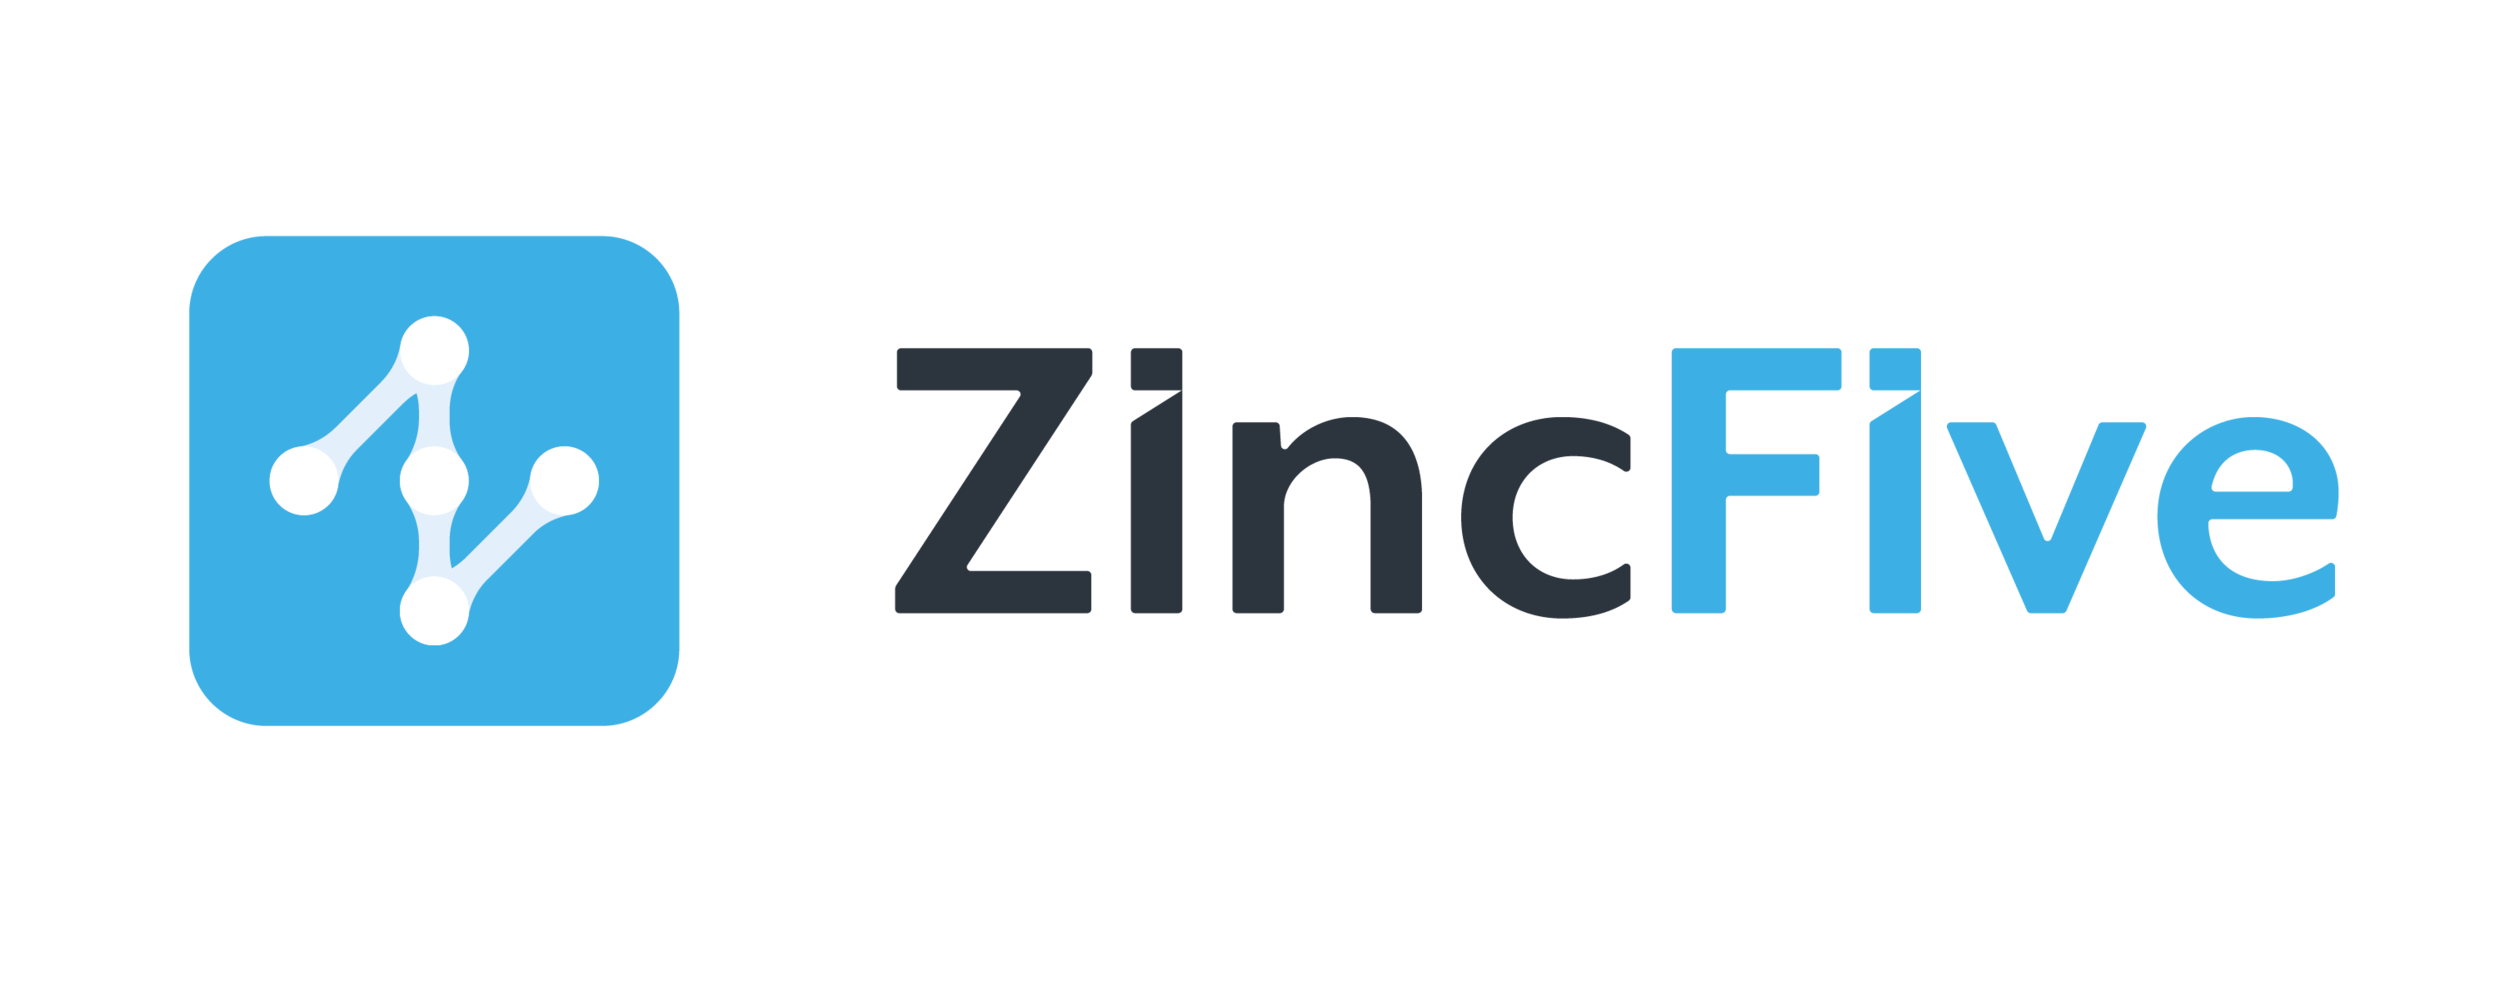 ZincFive-Logo-2020-Colored-RGB-01.png